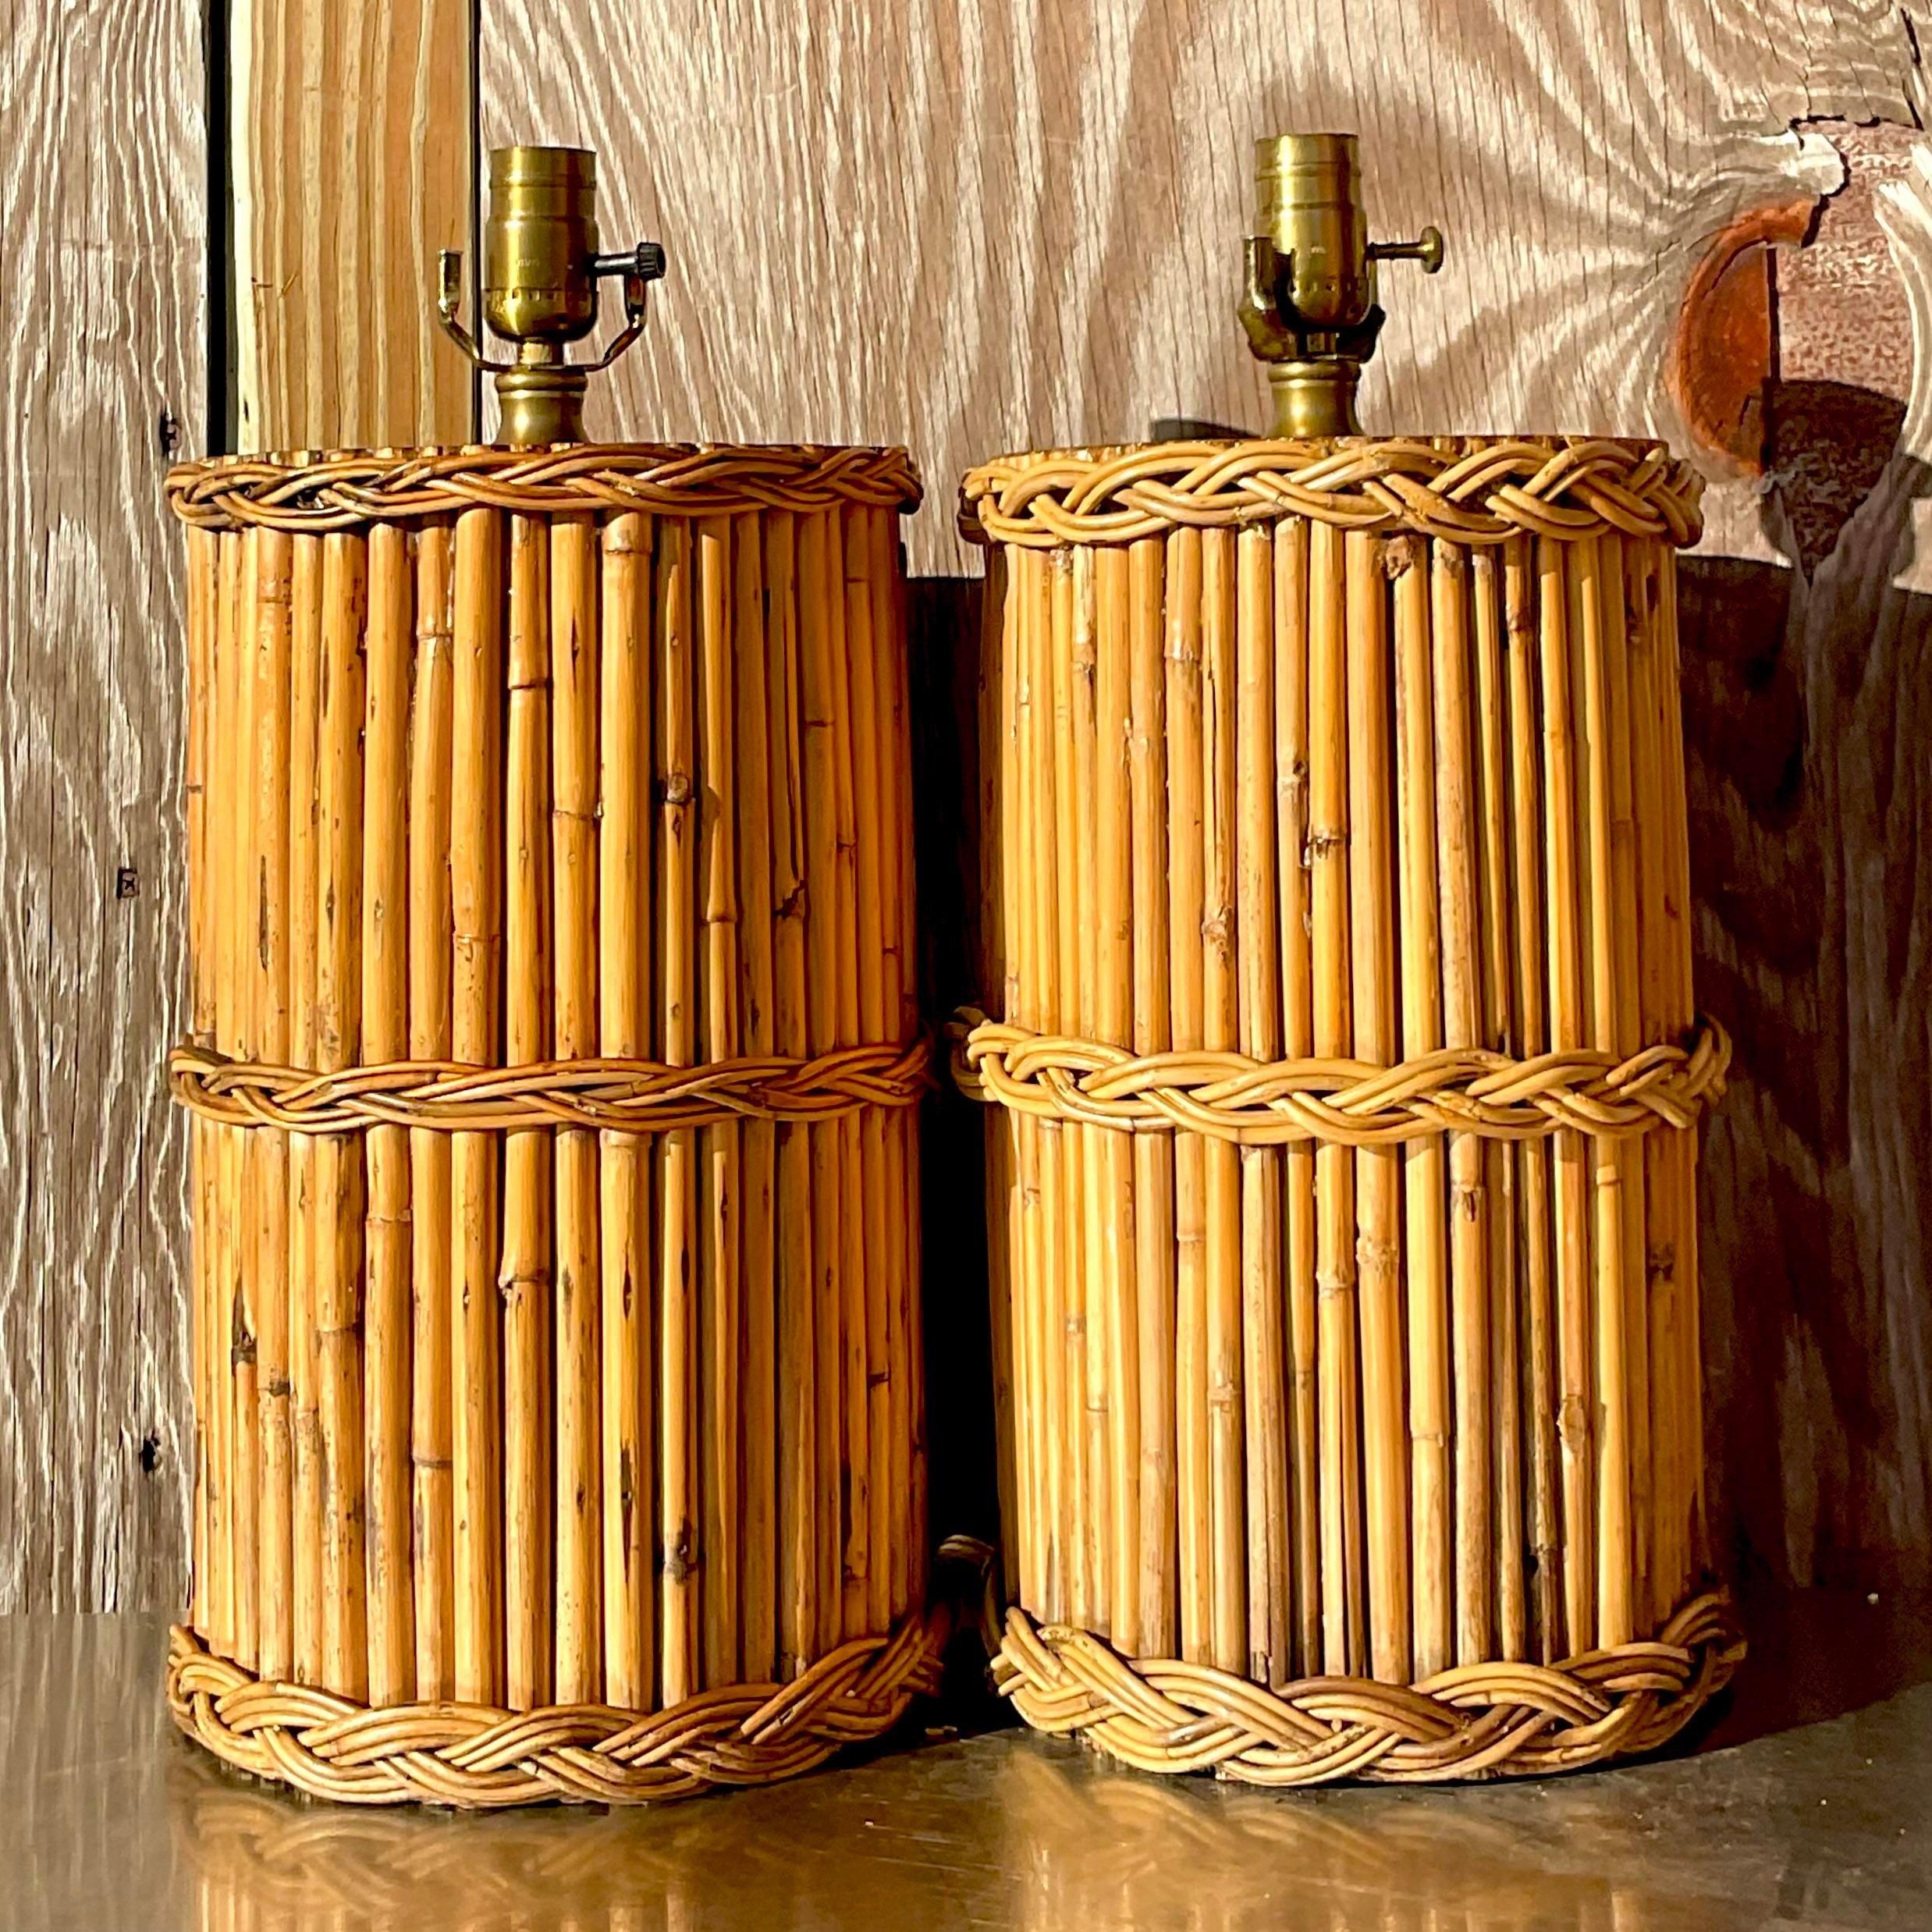 Metal Vintage Coastal Braided Rattan Table Lamps - a Pair For Sale